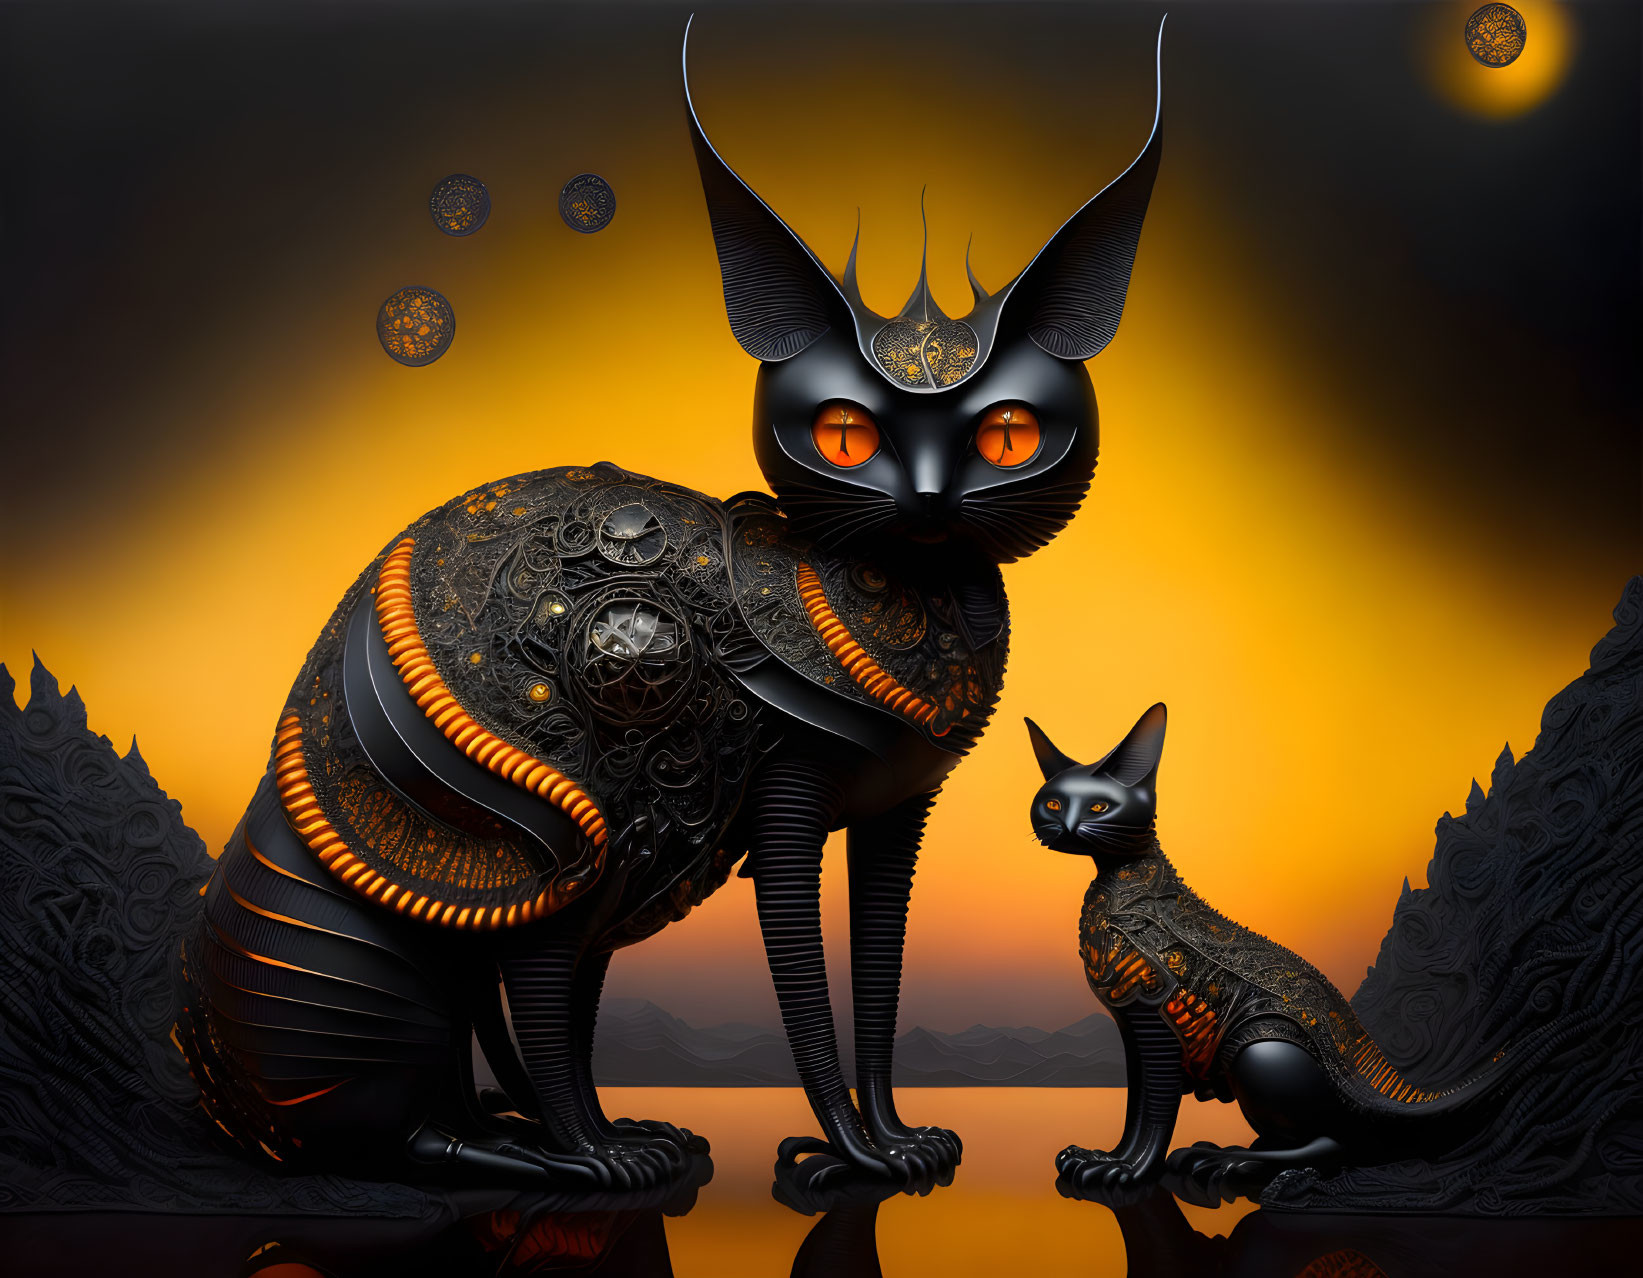 Stylized mechanical cats with glowing eyes on ornate dark background